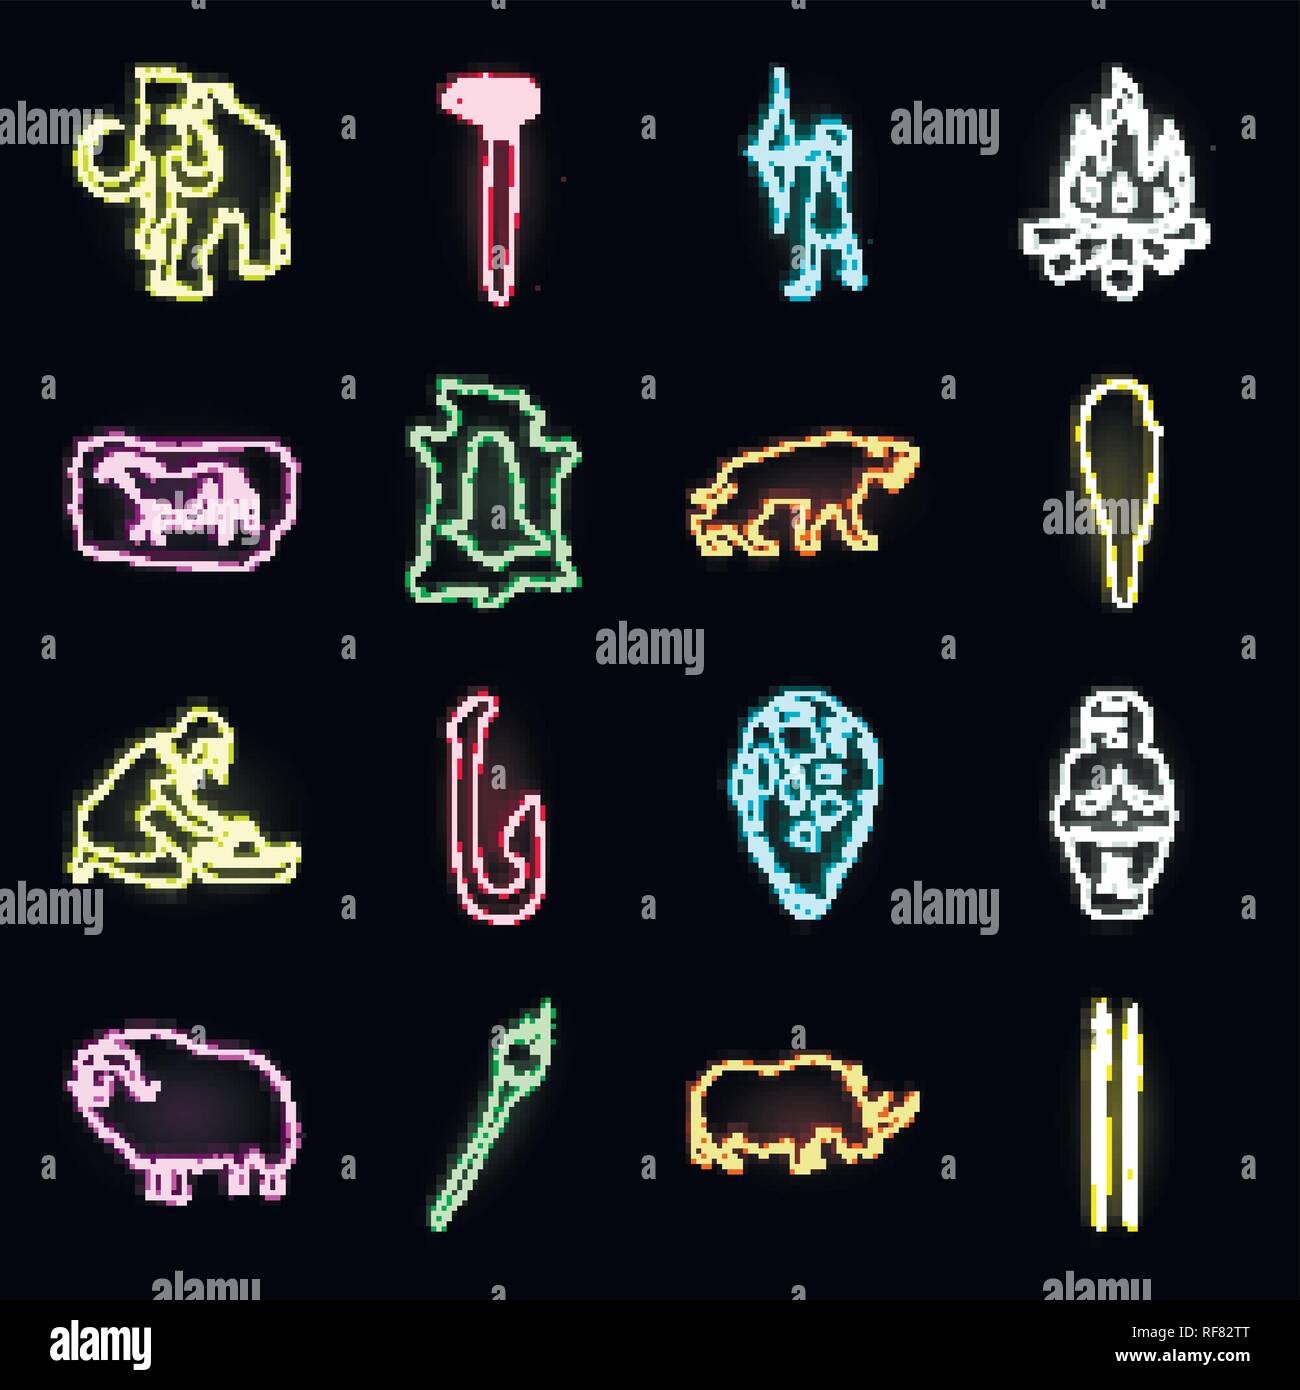 age,ancient,animal,antiquity,arrow,axe,beginning,bone,bow,campfire,caveman,cavewoman,collection,culture,design,development,epoch,fauna,fish,grindstone,hide,hook,humanity,icon,illustration,isolated,life,logo,man,muskox,neon,painting,people,period,rhinoceros,saber-toothed,set,sign,spears,stone,survival,symbol,tiger,tool,torch,truncheon,vector,venus,web,woolly mammoth Vector Vectors , Stock Vector